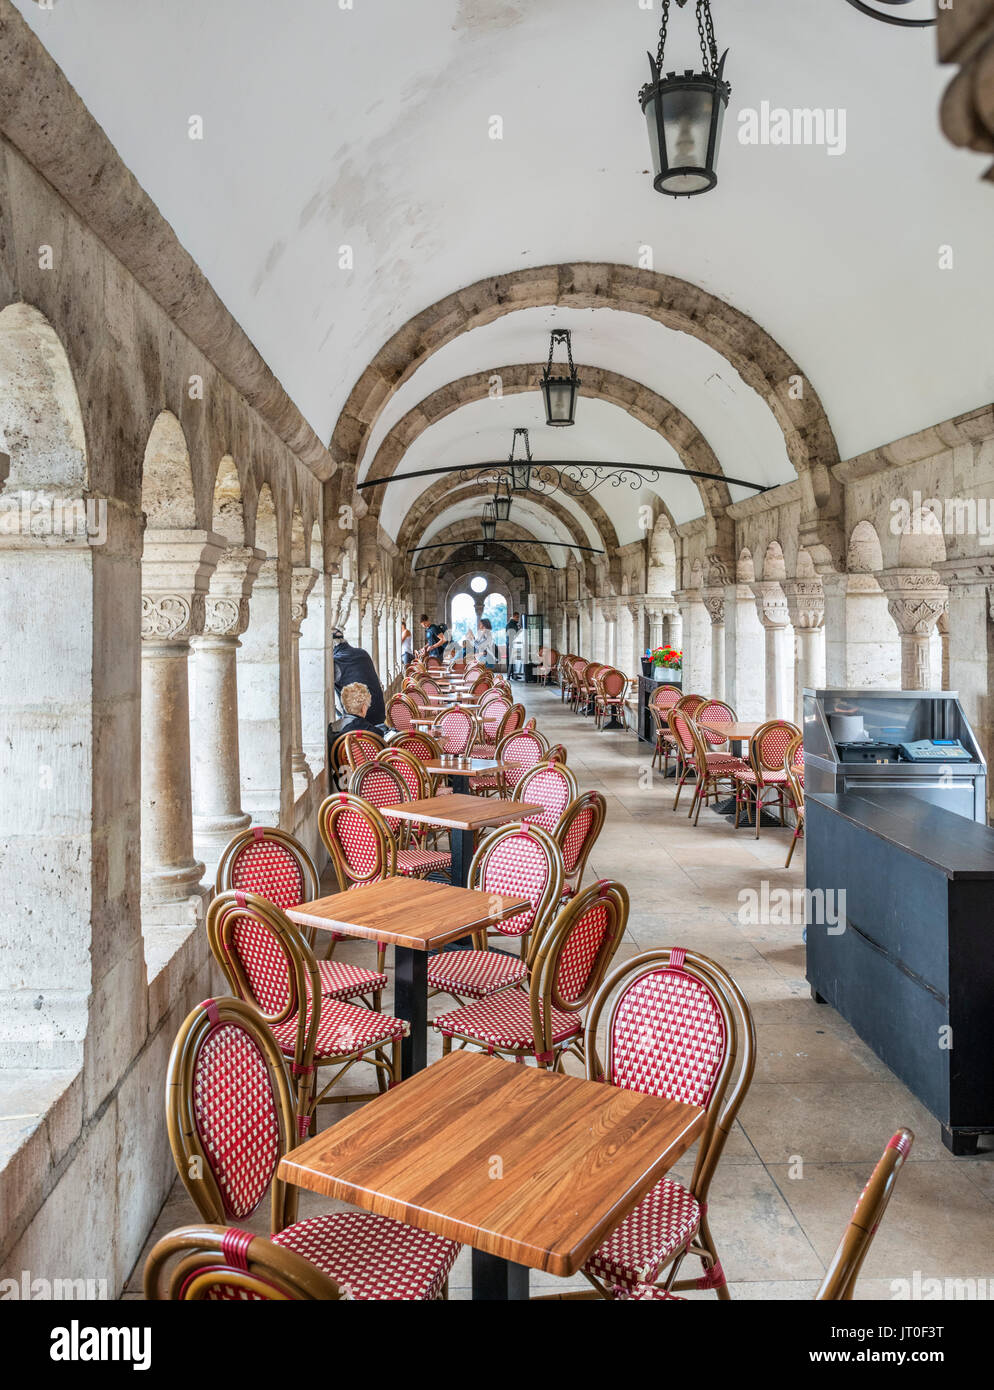 Cafe in Fishermen's Bastion, Buda Castle district, Castle Hill, Budapest, Hungary Stock Photo